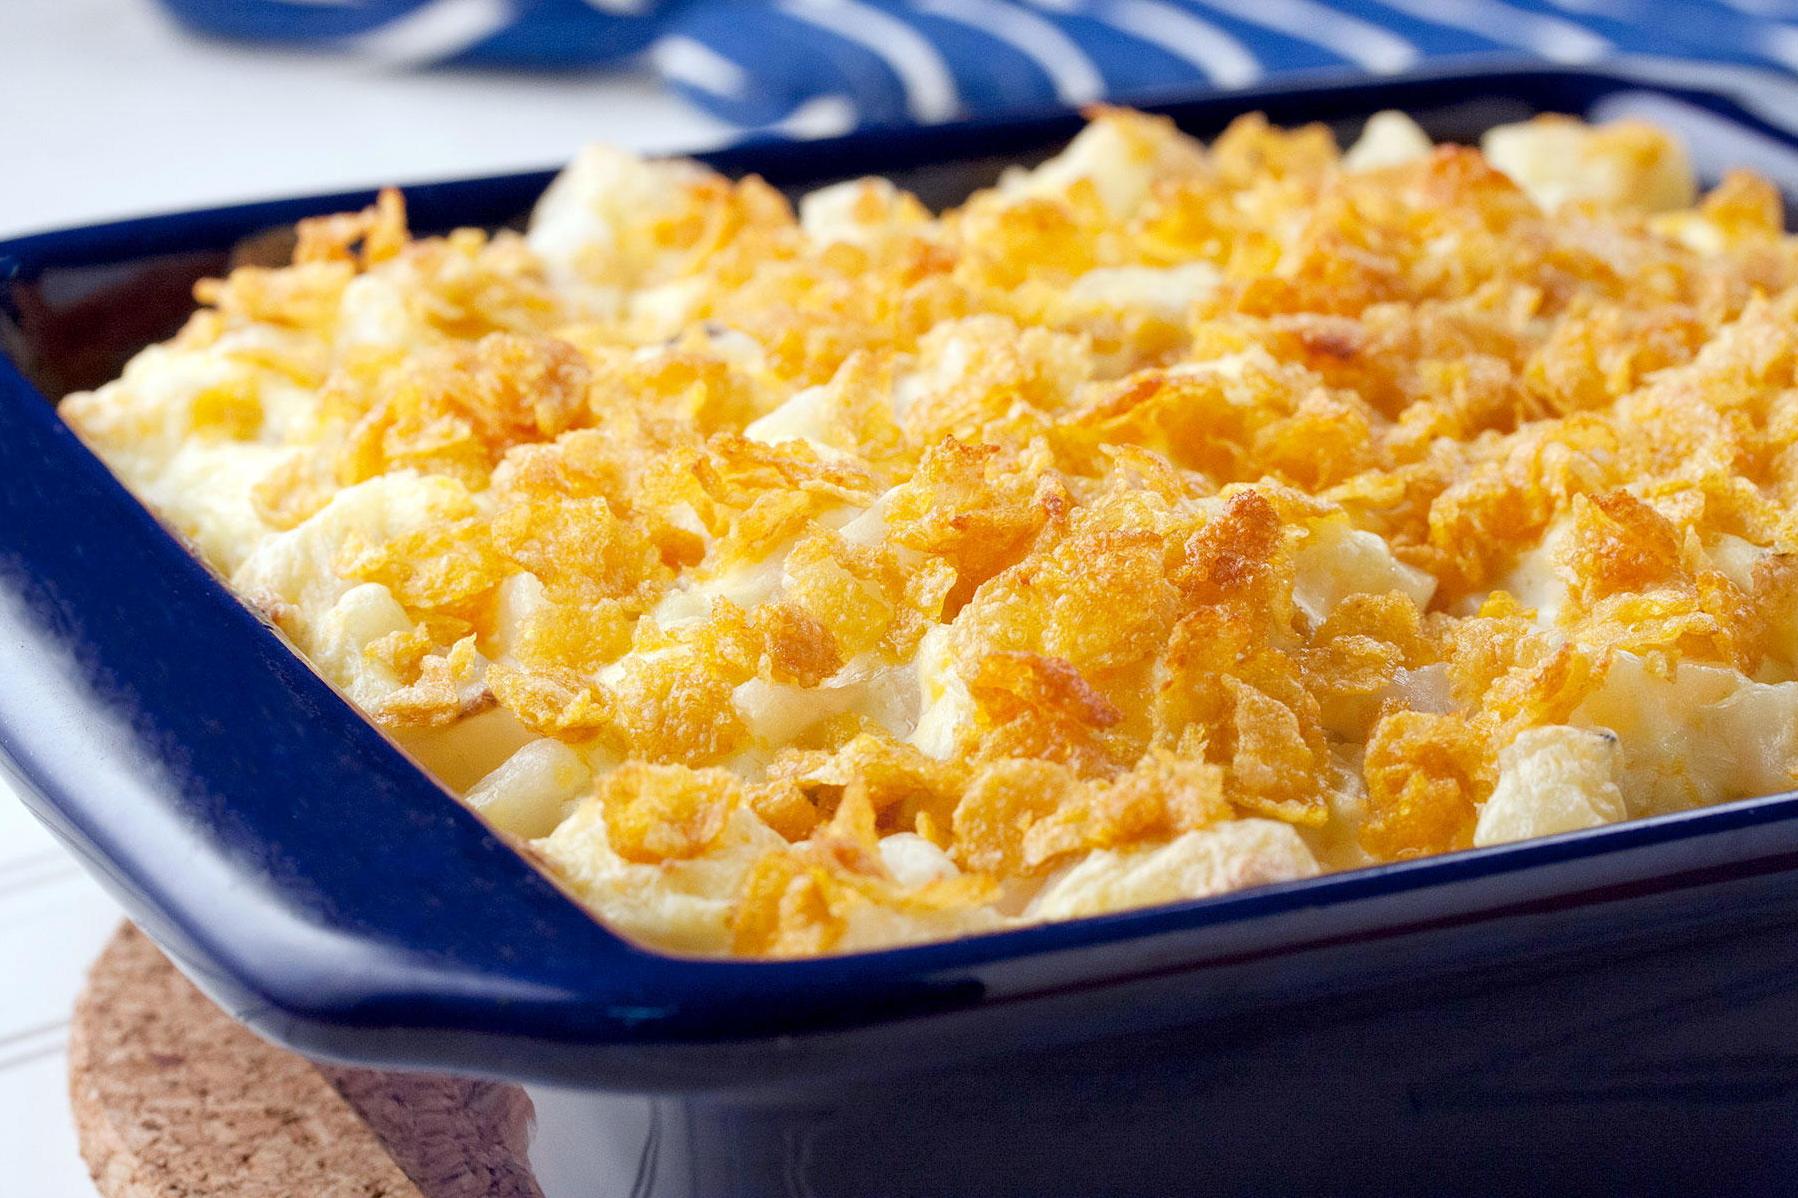  This potato casserole is comforting and warm, like a hug in a dish.